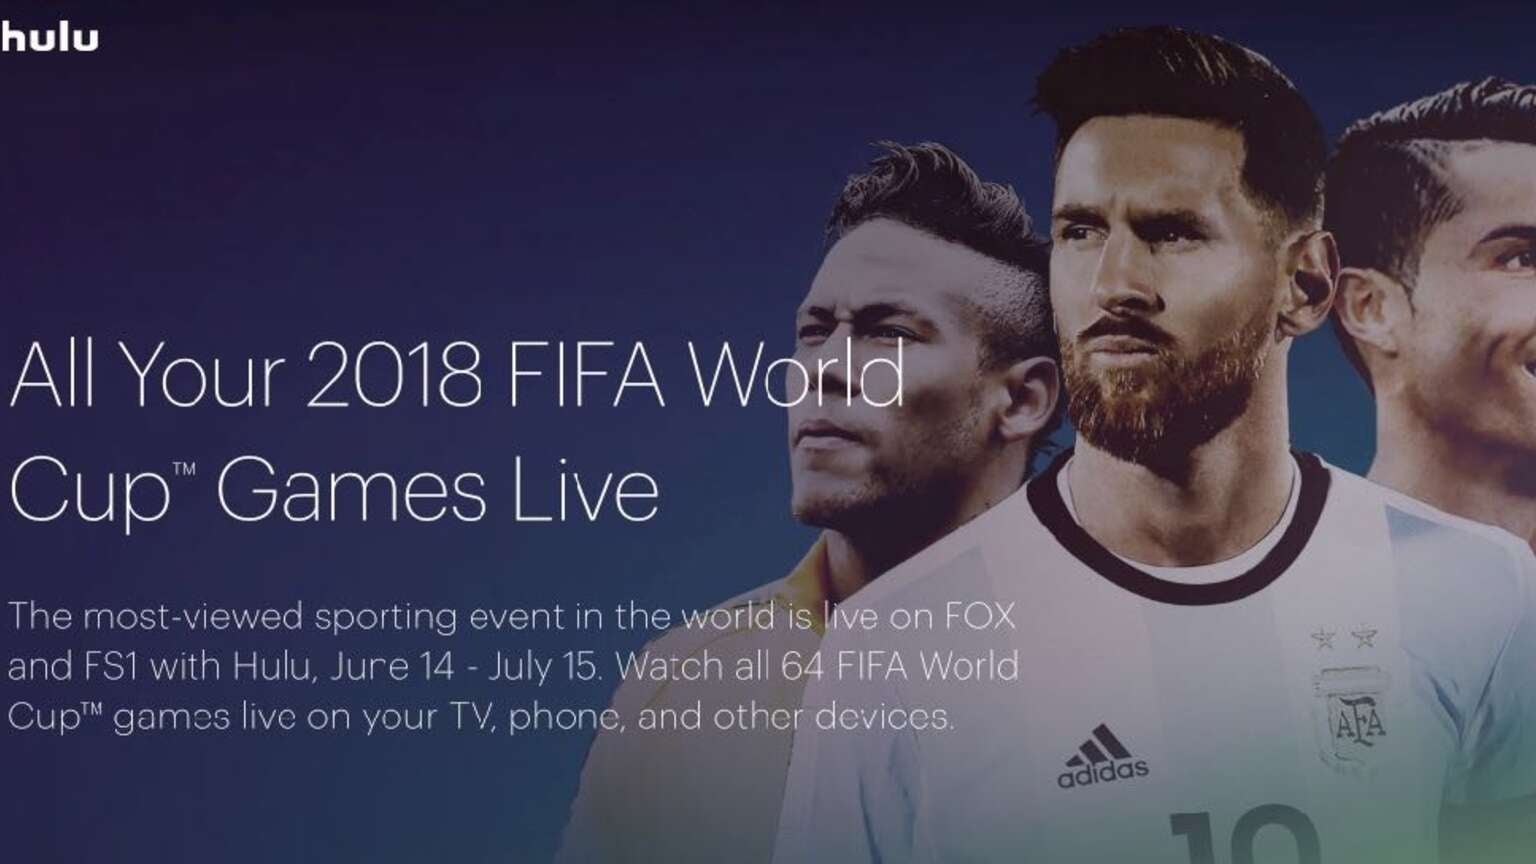 World Cup Driving 50 WeekOverWeek Growth for Hulu The Streamable (CO)